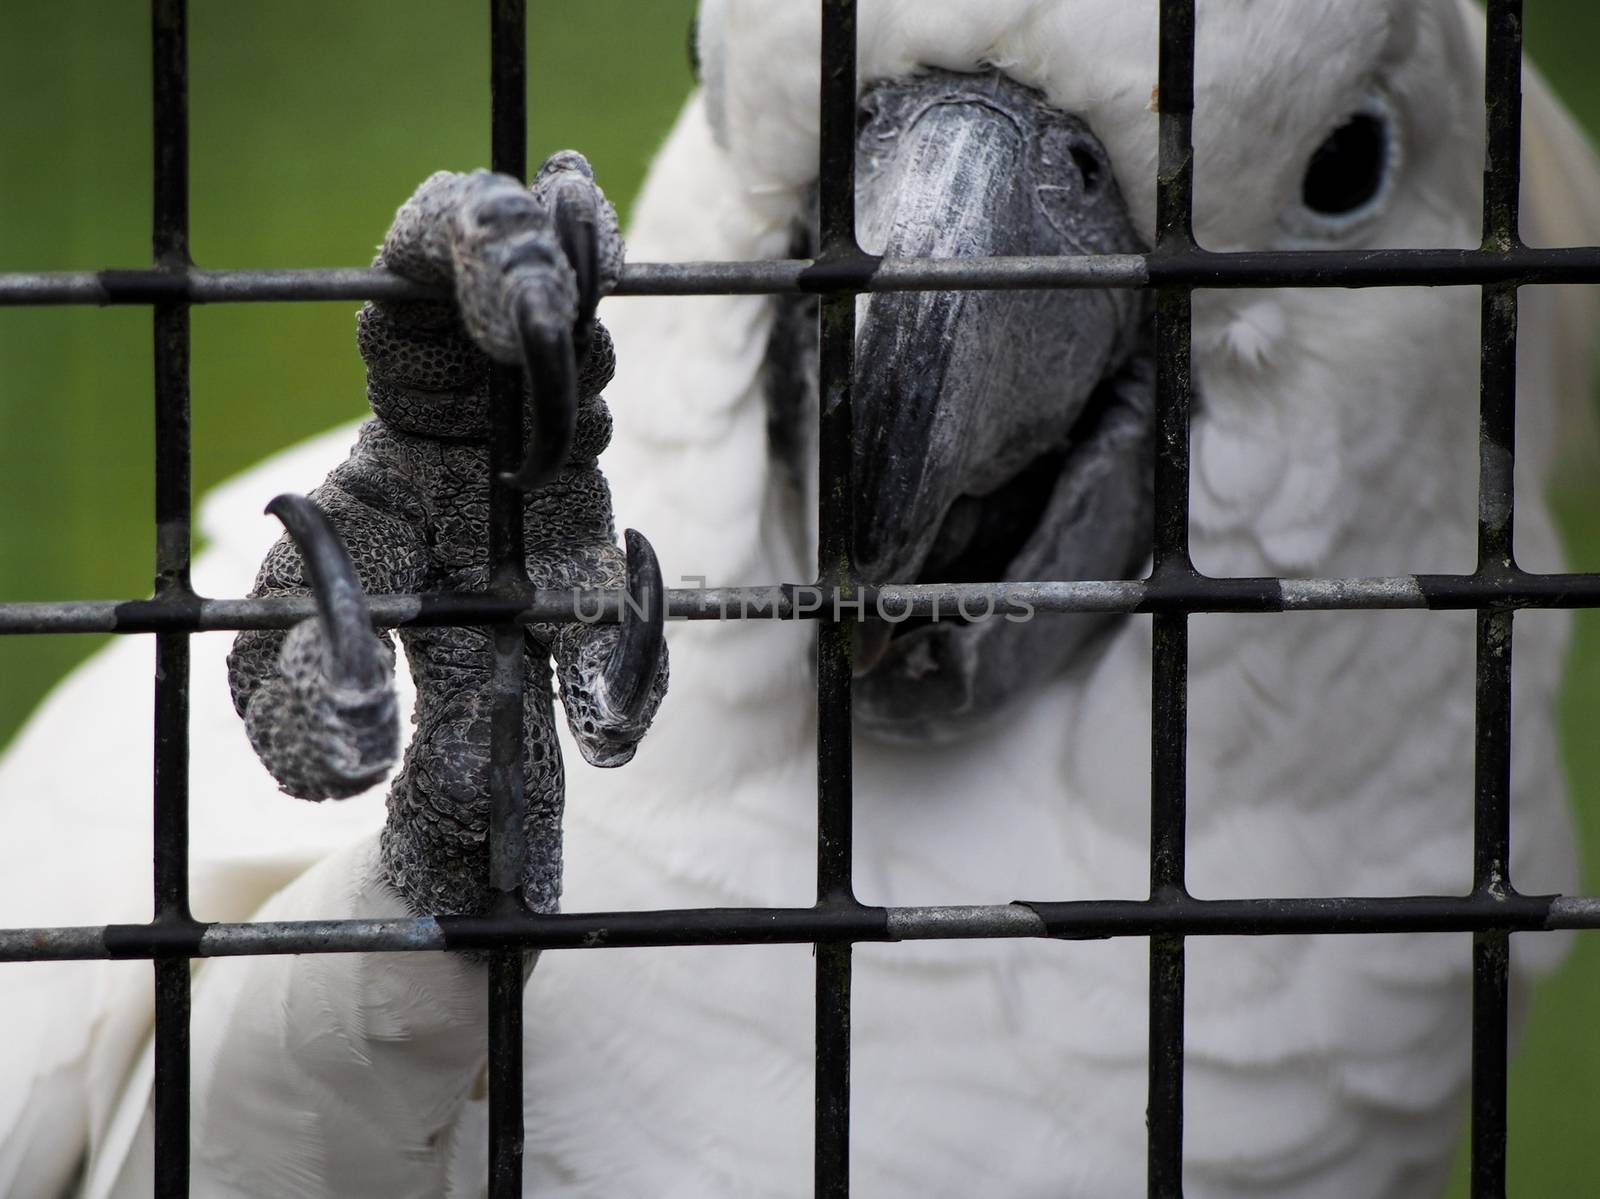 Cockatoo Clawing at a Cage by NikkiGensert